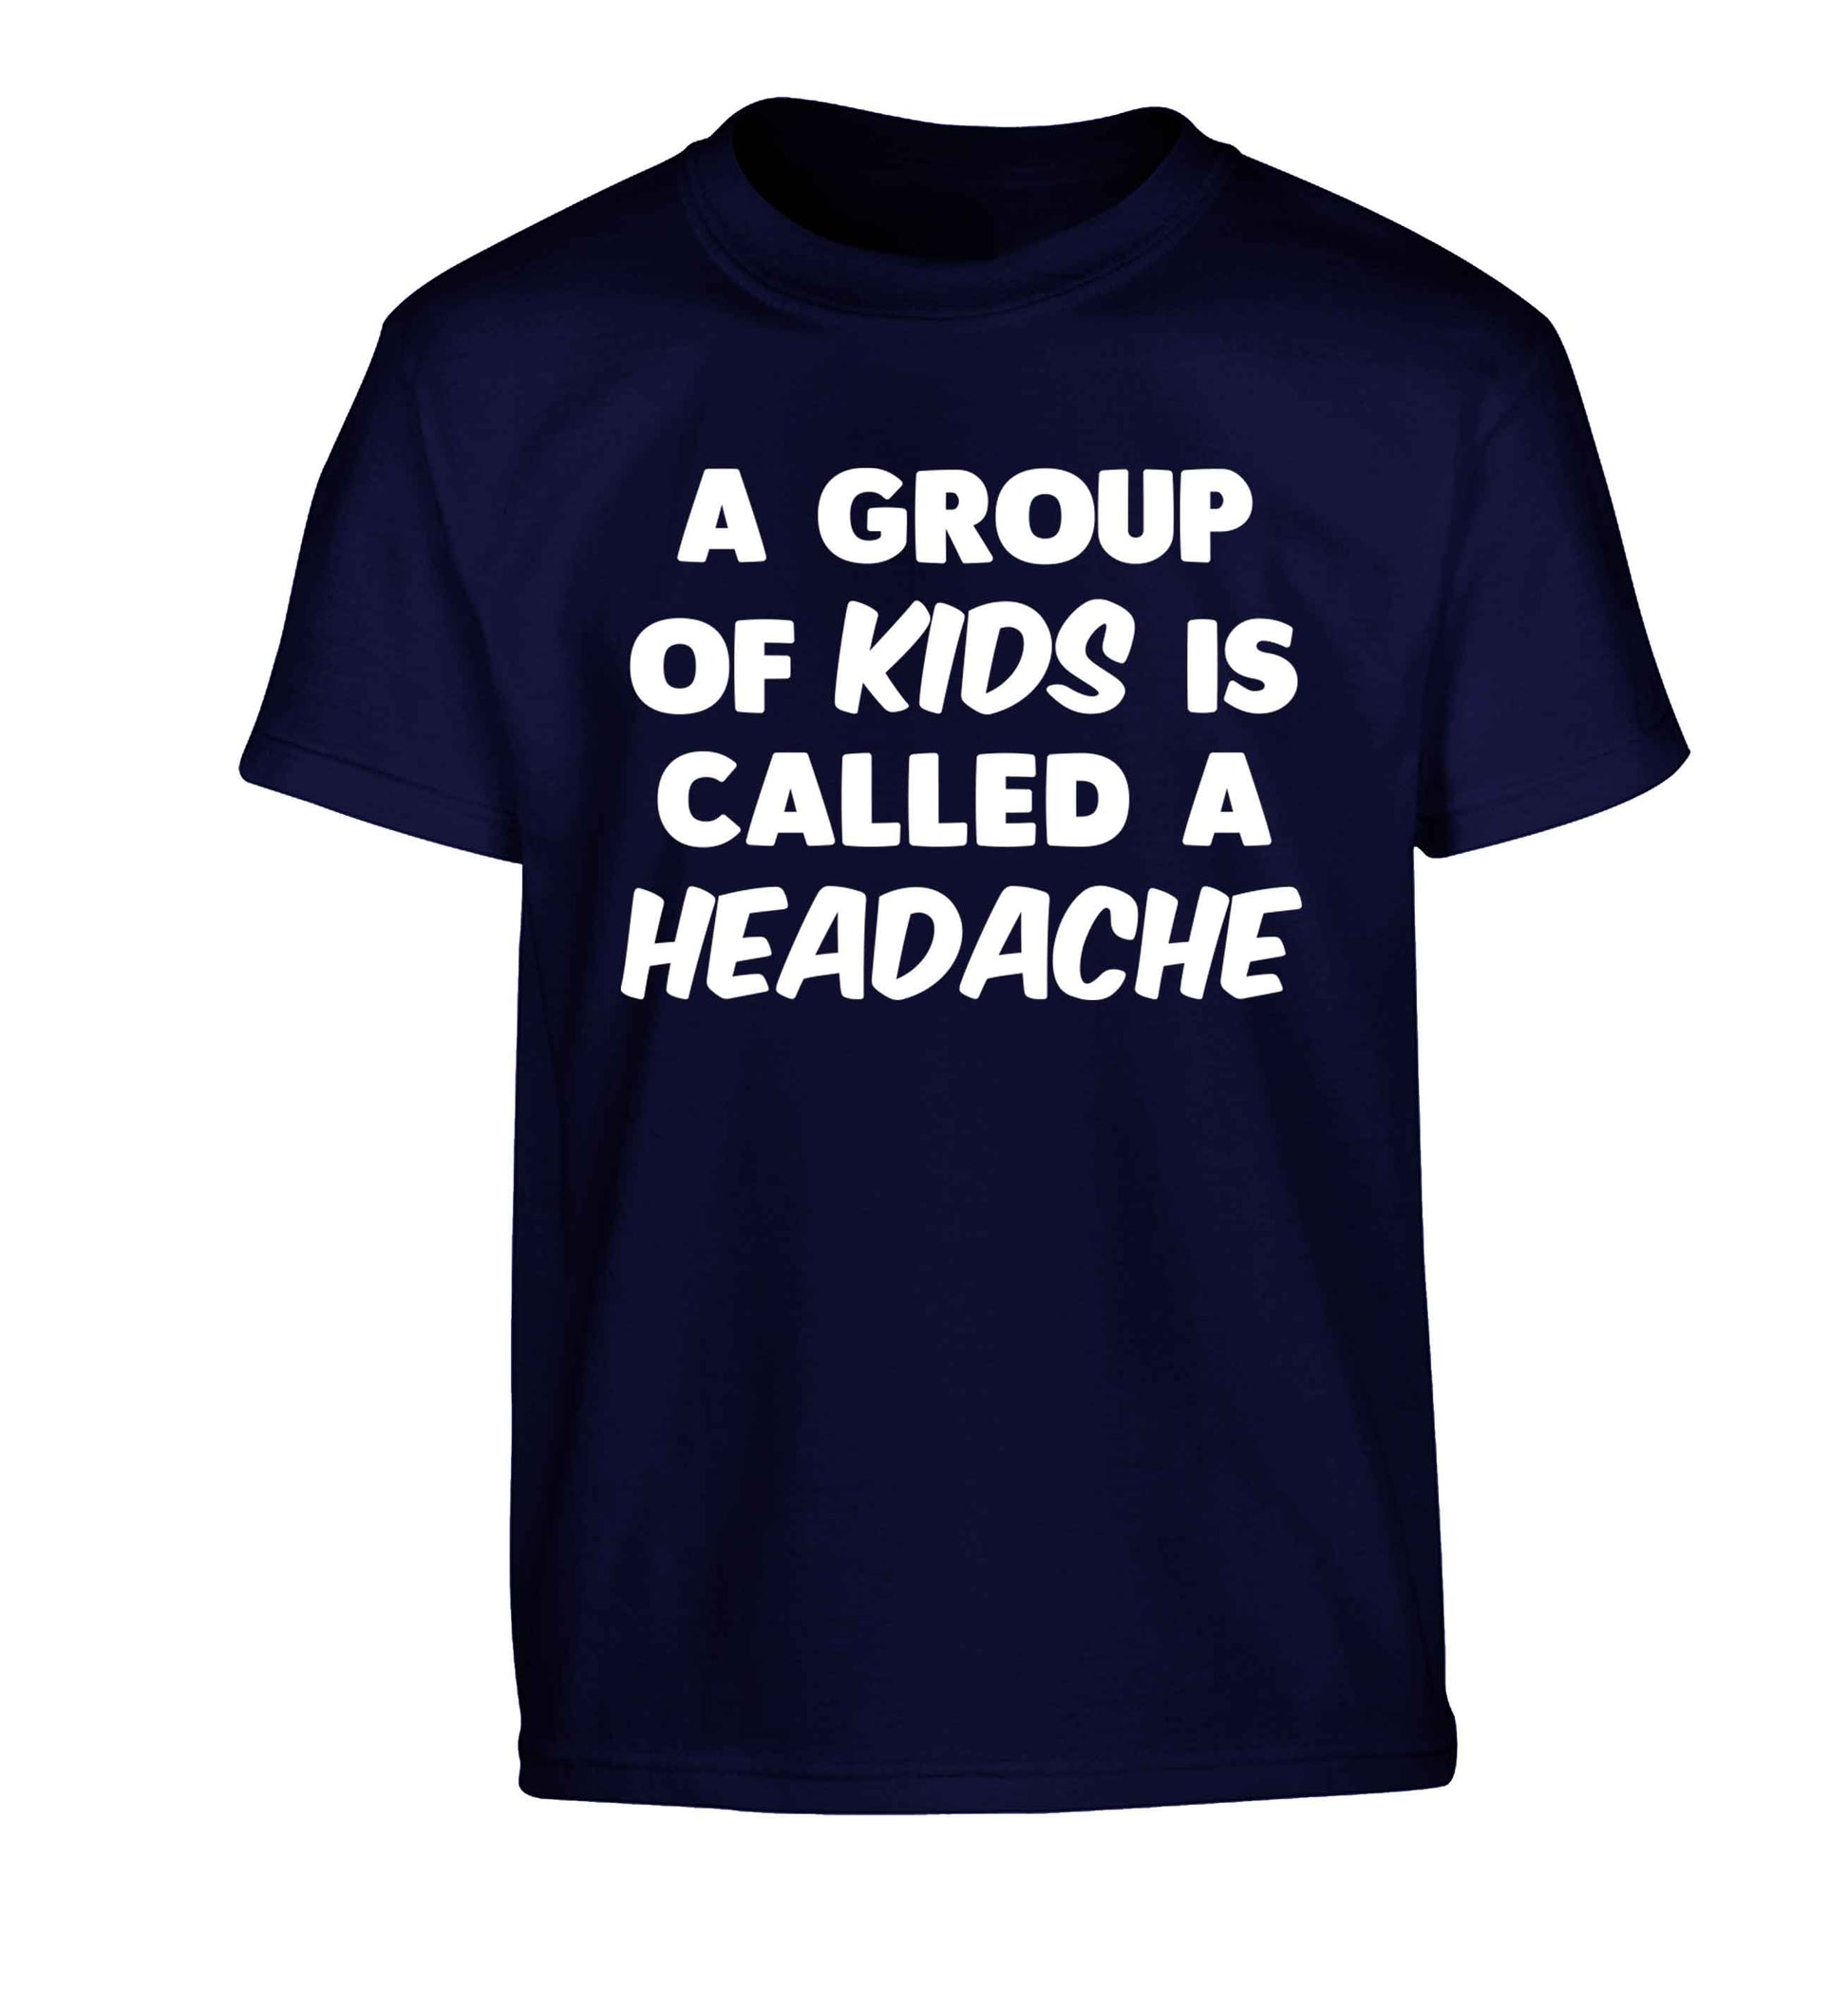 A group of kids is called a headache Children's navy Tshirt 12-13 Years